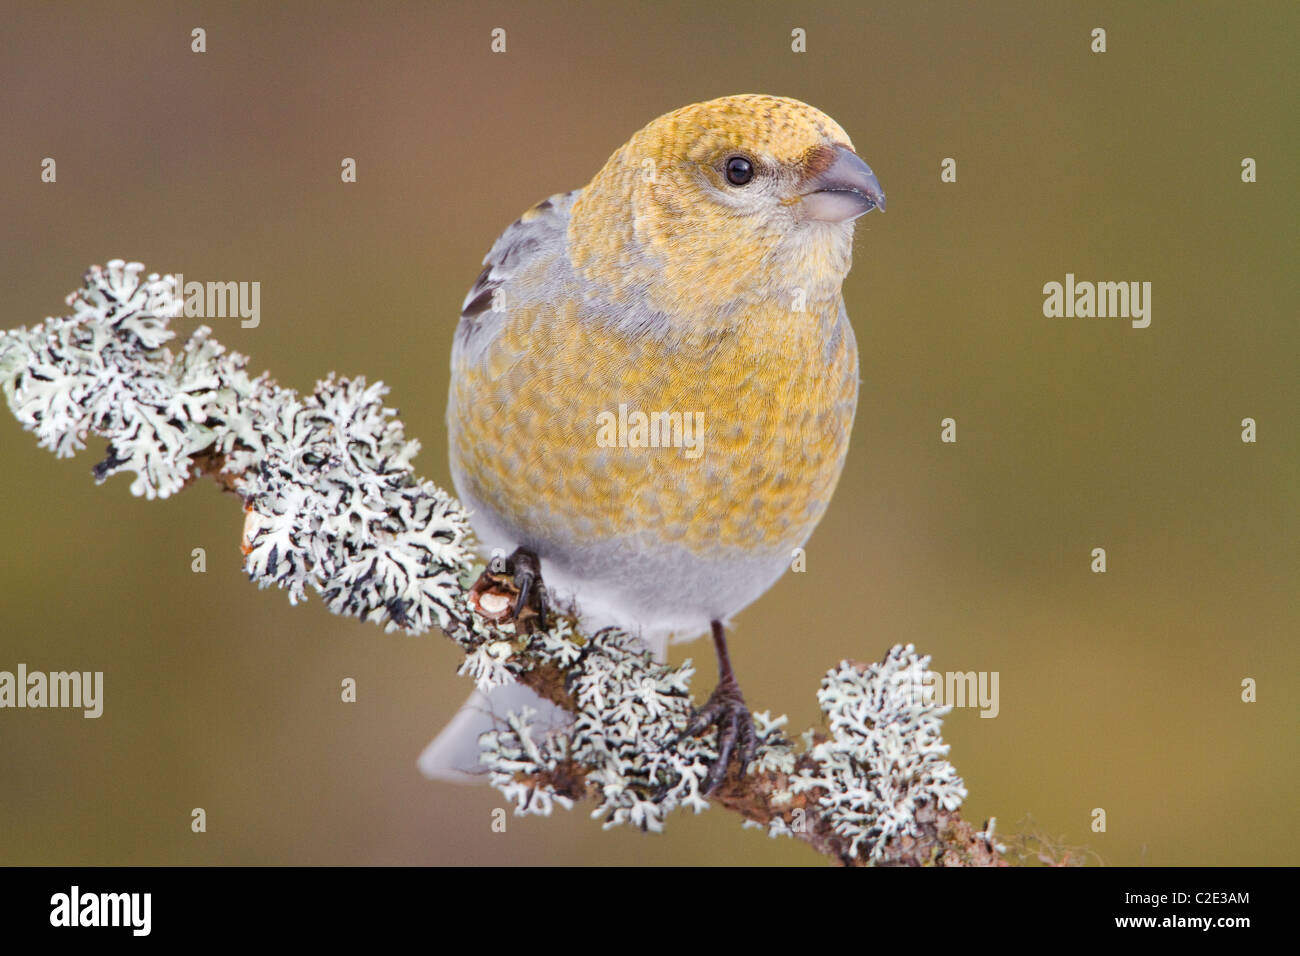 Pine Grosbeak Pinicola enucleator male on lichen covered branch in Taiga forest in Northern Finland Stock Photo